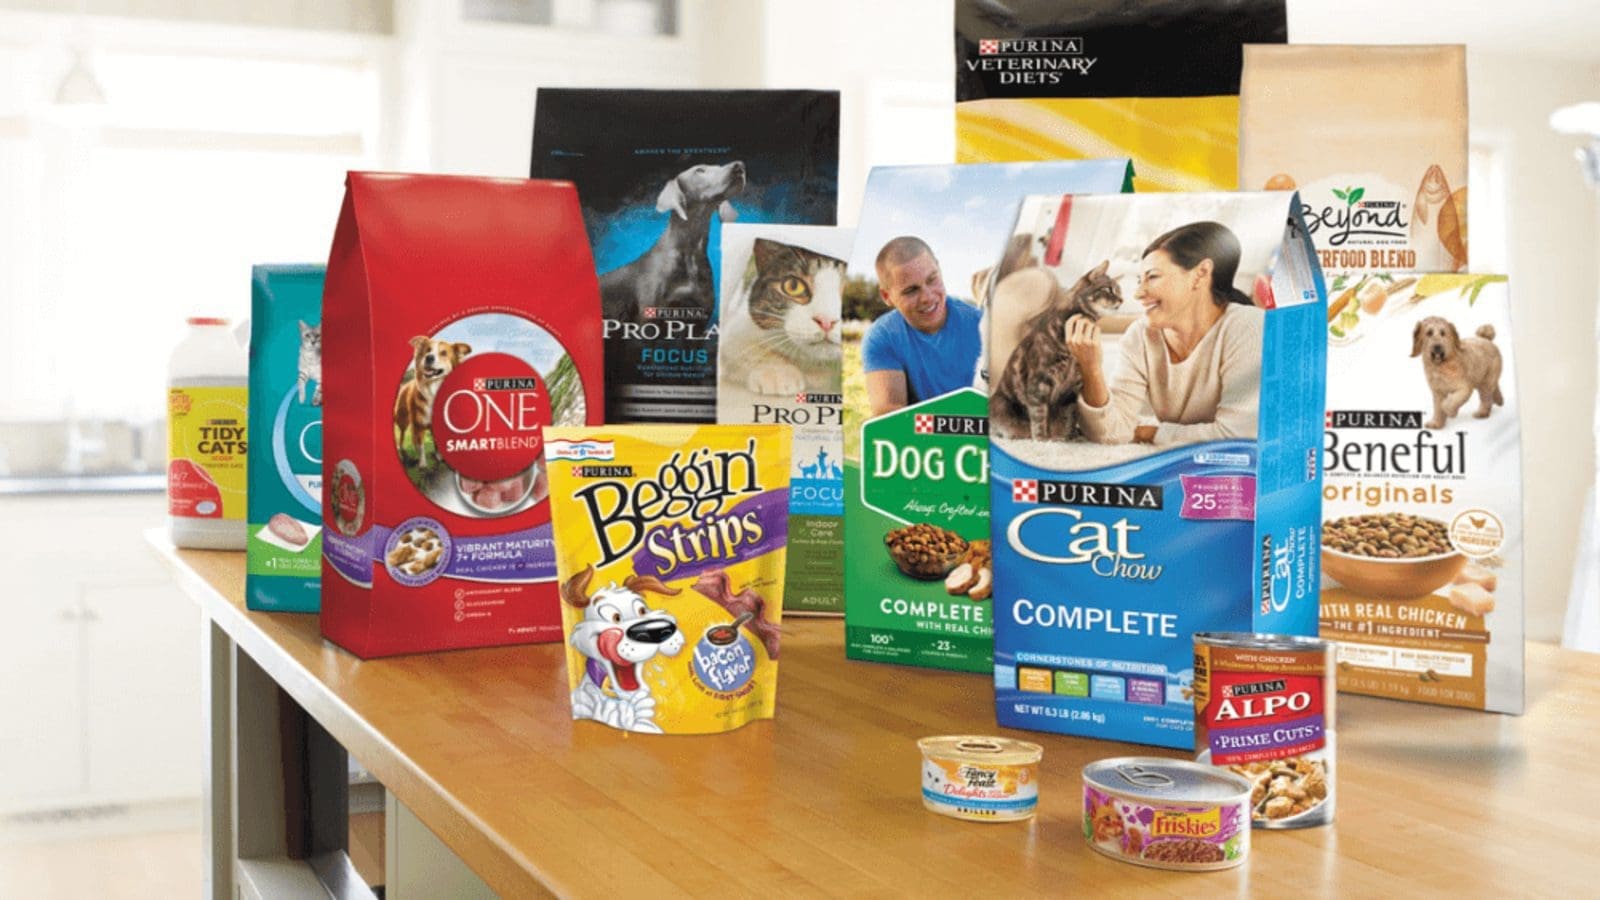 Nestle Purina acquires pet food facility in Miami to expand in-house capabilities for dog and cat treats